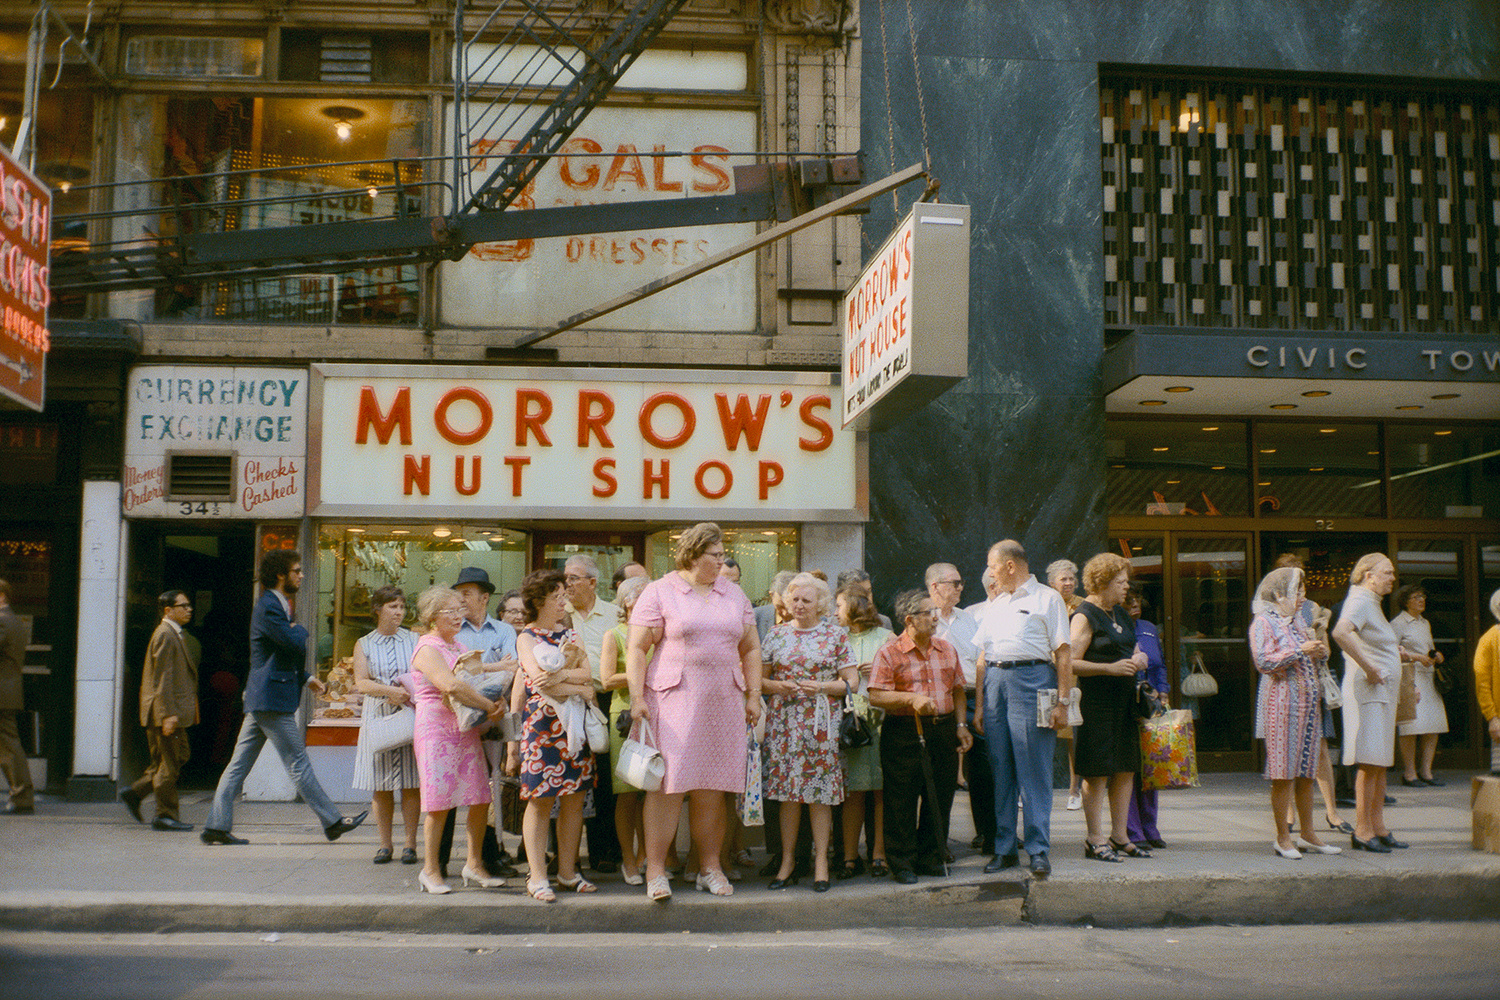 Stephen Shore

Chicago, Illinois, July 1972

1972

Chromogenic color print

5 x 7 1/2 inches

(12.7 x 19.1 cm)

Edition of 10

SS 462